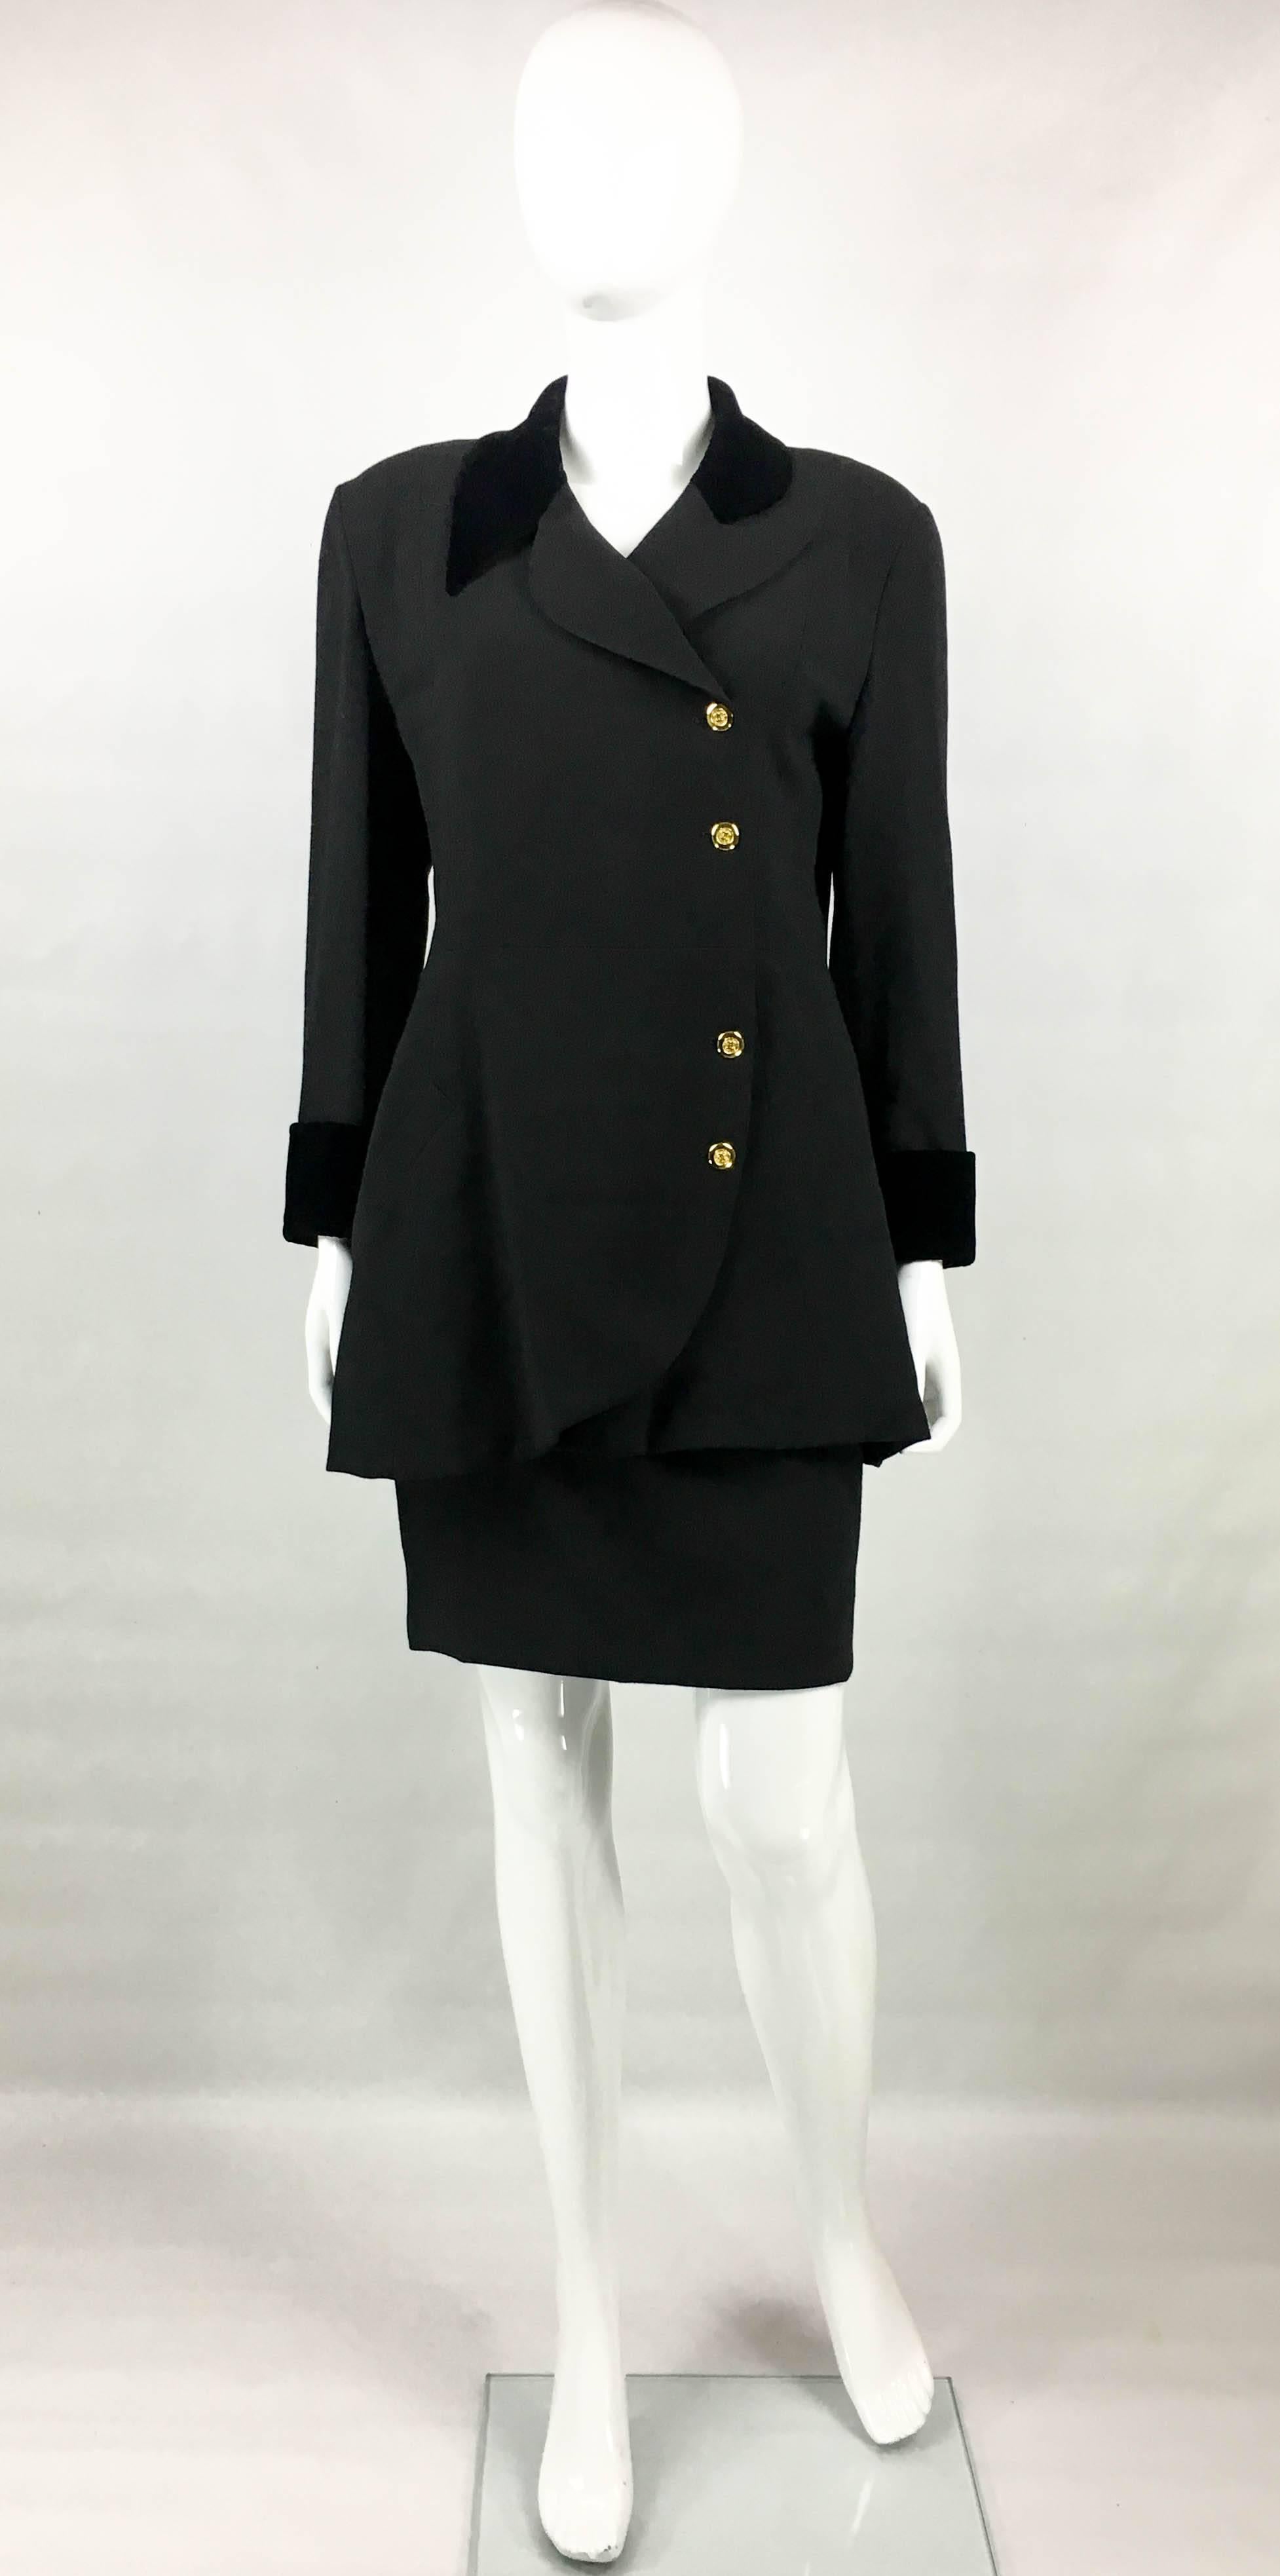 Vintage Chanel Black Wool Skirt Suit. This striking ensemble by Chanel dates back from the early 1990’s. Crafted in a light wool black fabric, it features black velvet collar and cuffs. The loose-fit design brings edgier elements as the asymmetric